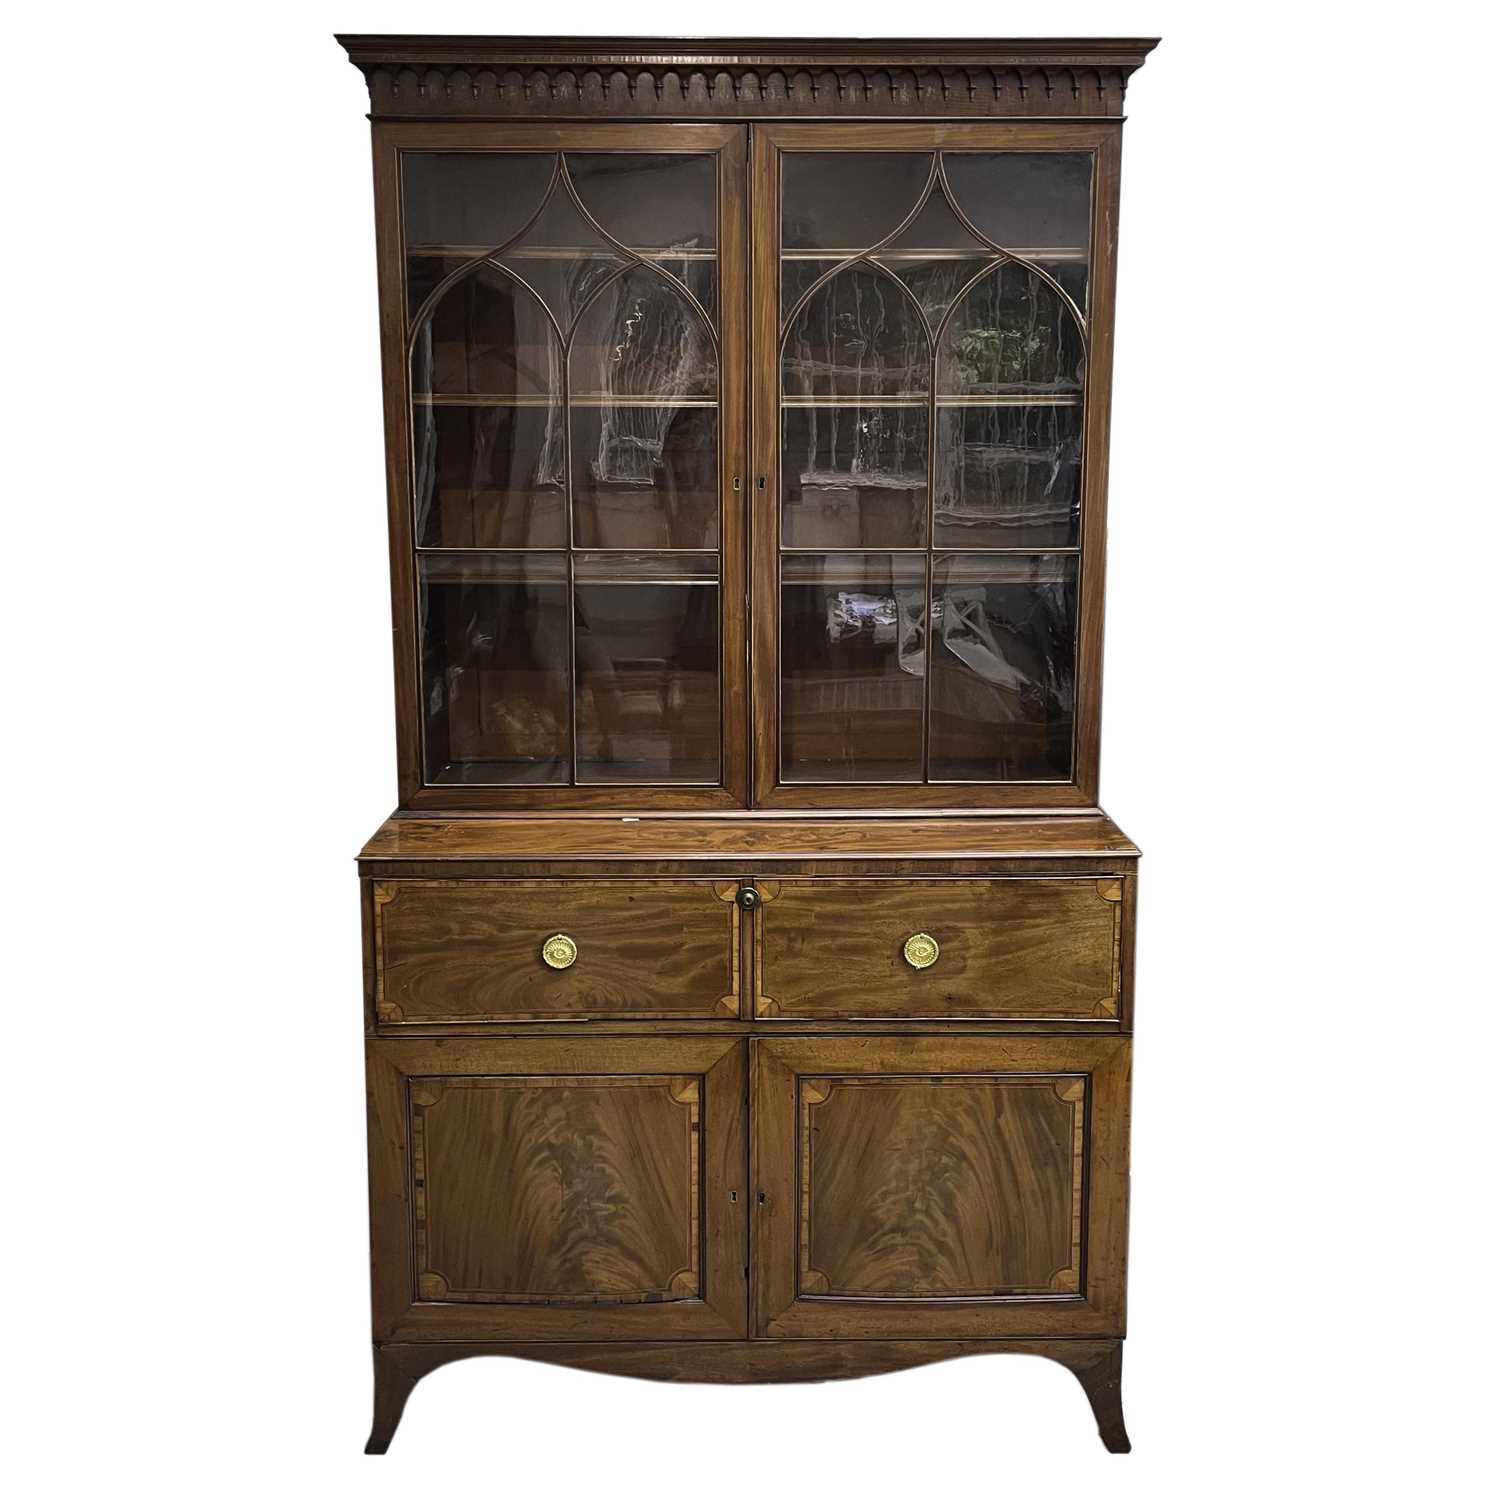 A George III mahogany and satinwood banded secretaire bookcase.